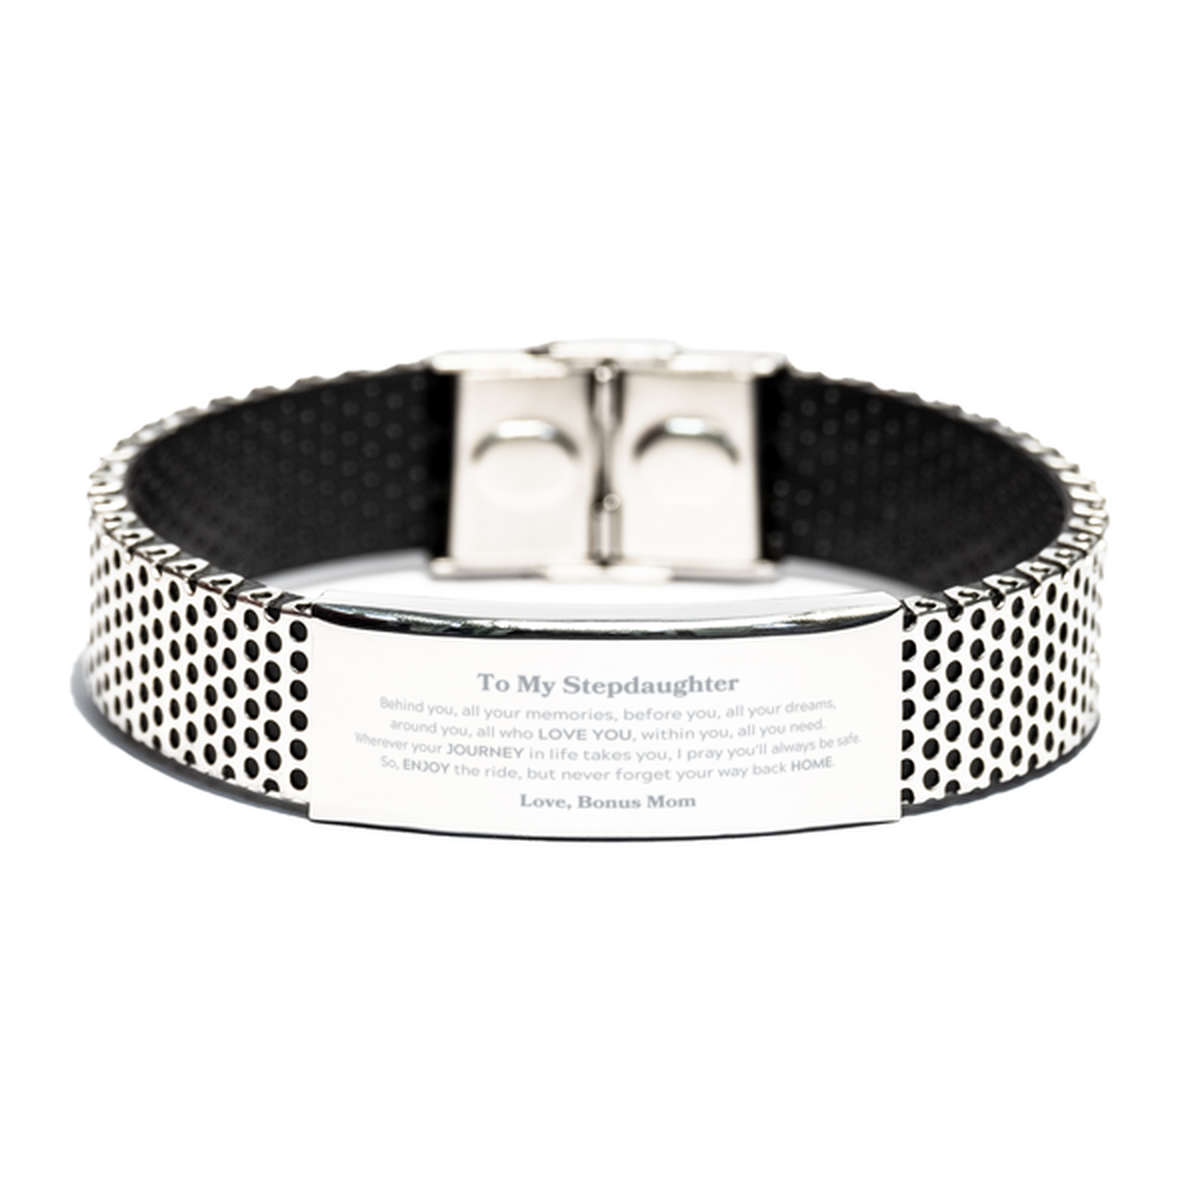 To My Stepdaughter Graduation Gifts from Bonus Mom, Stepdaughter Stainless Steel Bracelet Christmas Birthday Gifts for Stepdaughter Behind you, all your memories, before you, all your dreams. Love, Bonus Mom